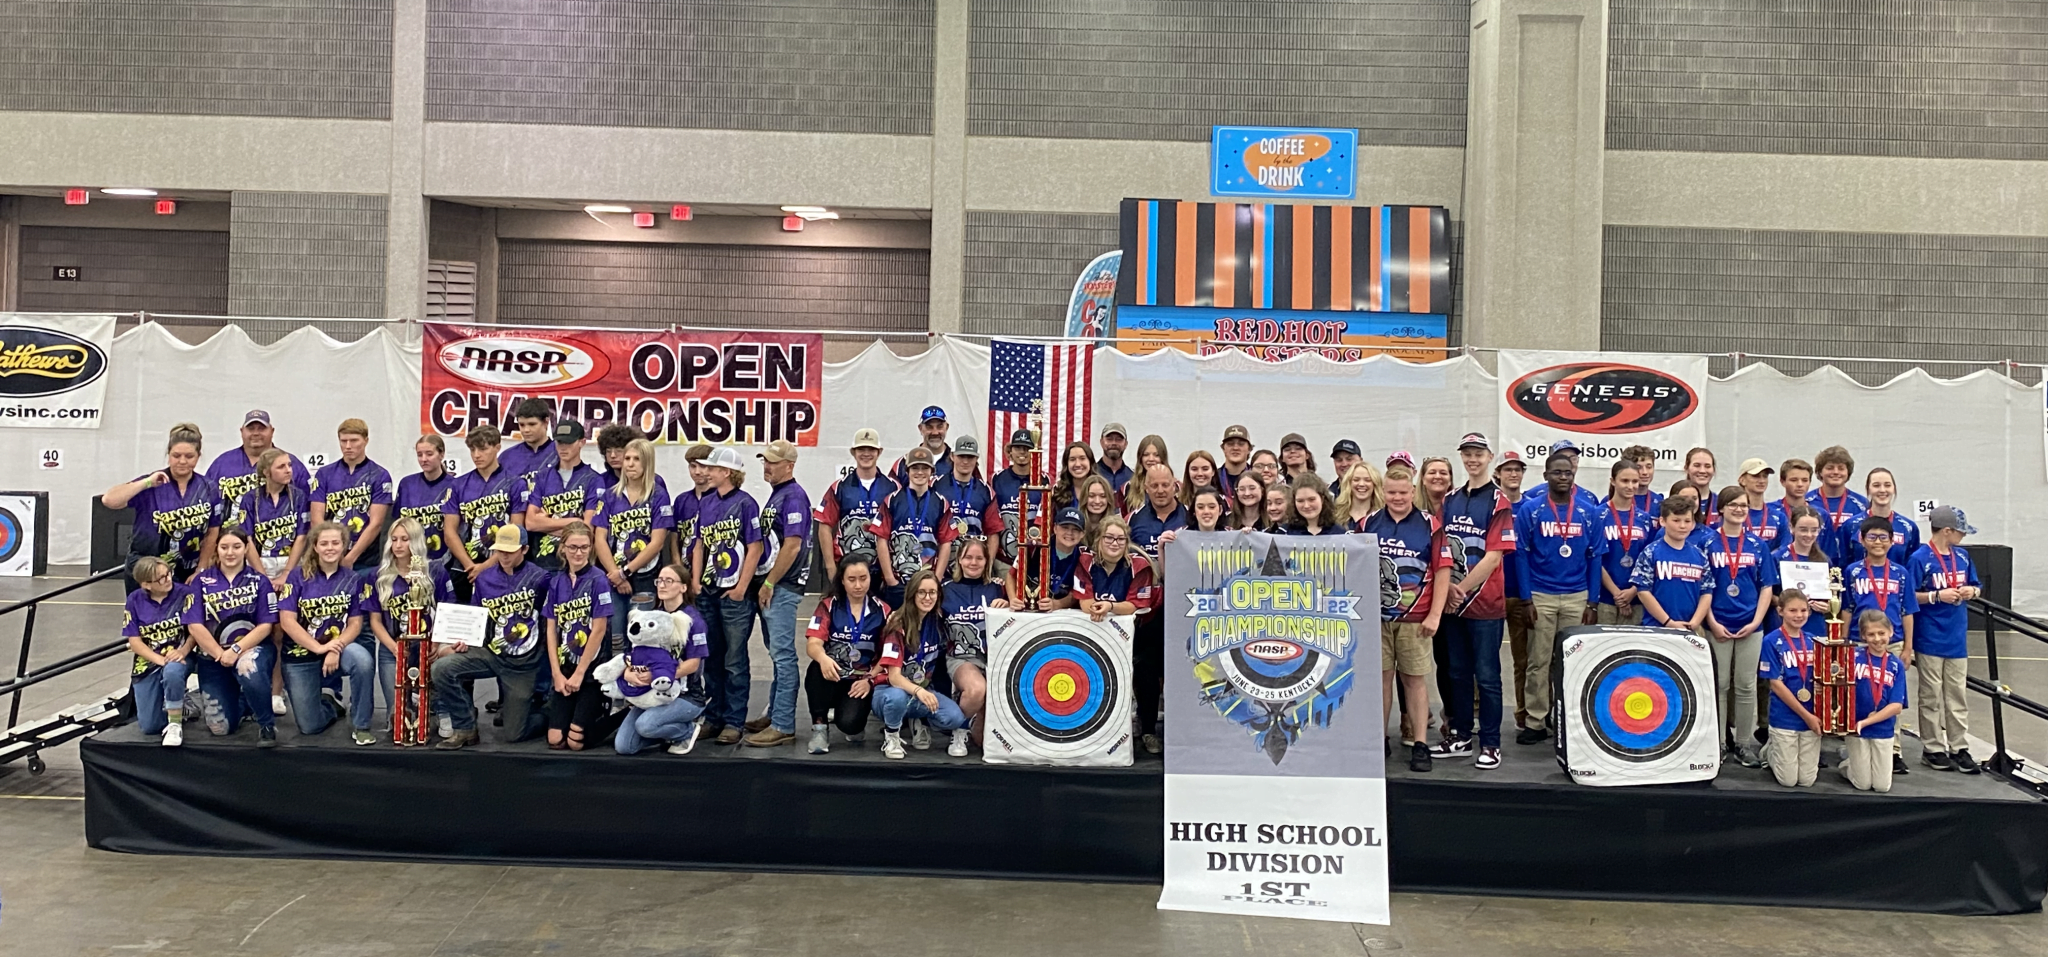 NASP® completes inperson competition schedule with 2,300 participants